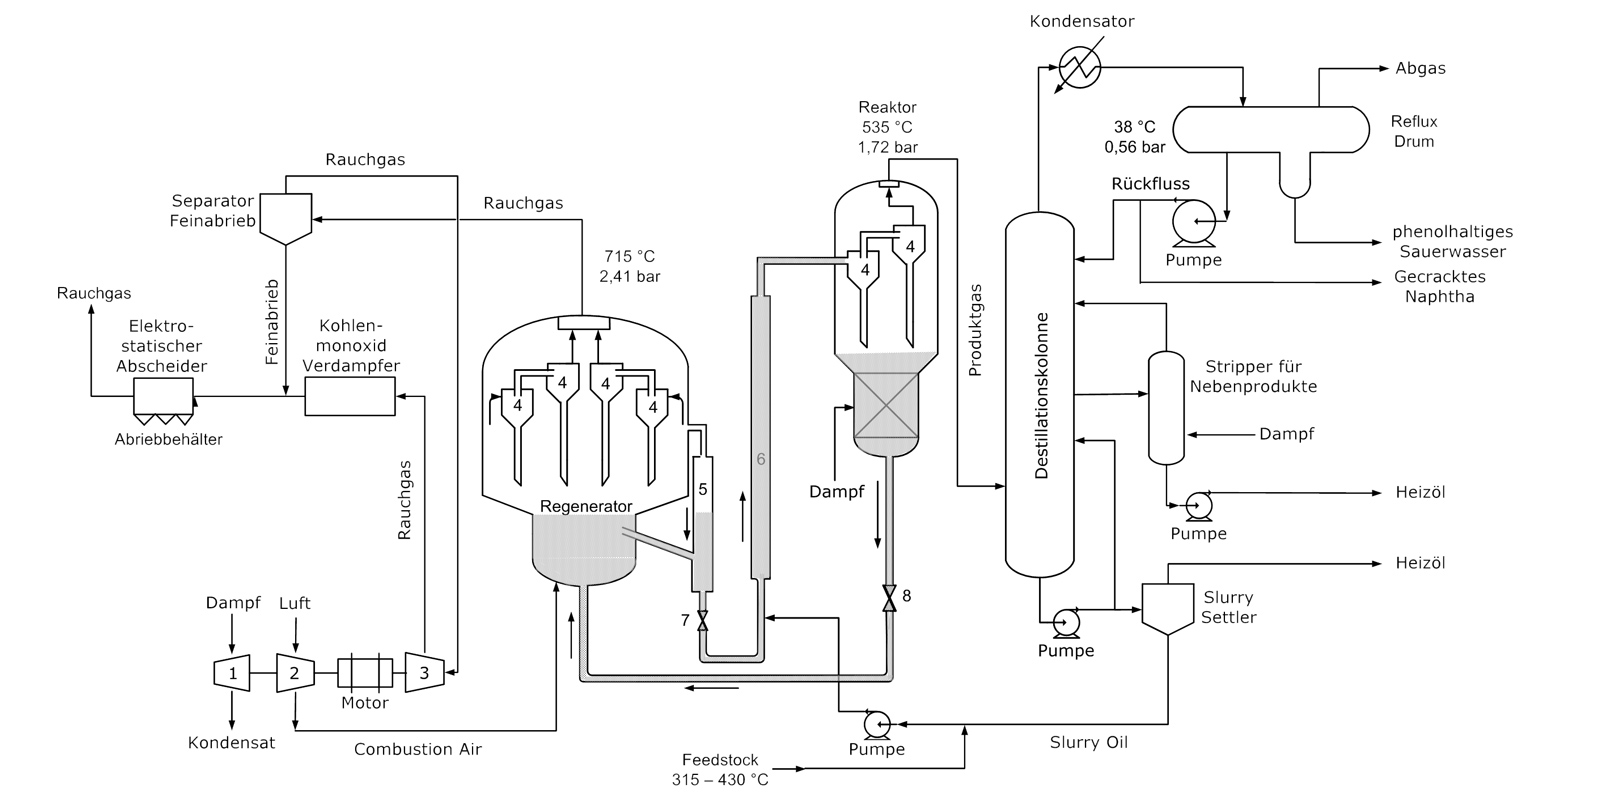 Fluidized Bed Furnace in Indonesia